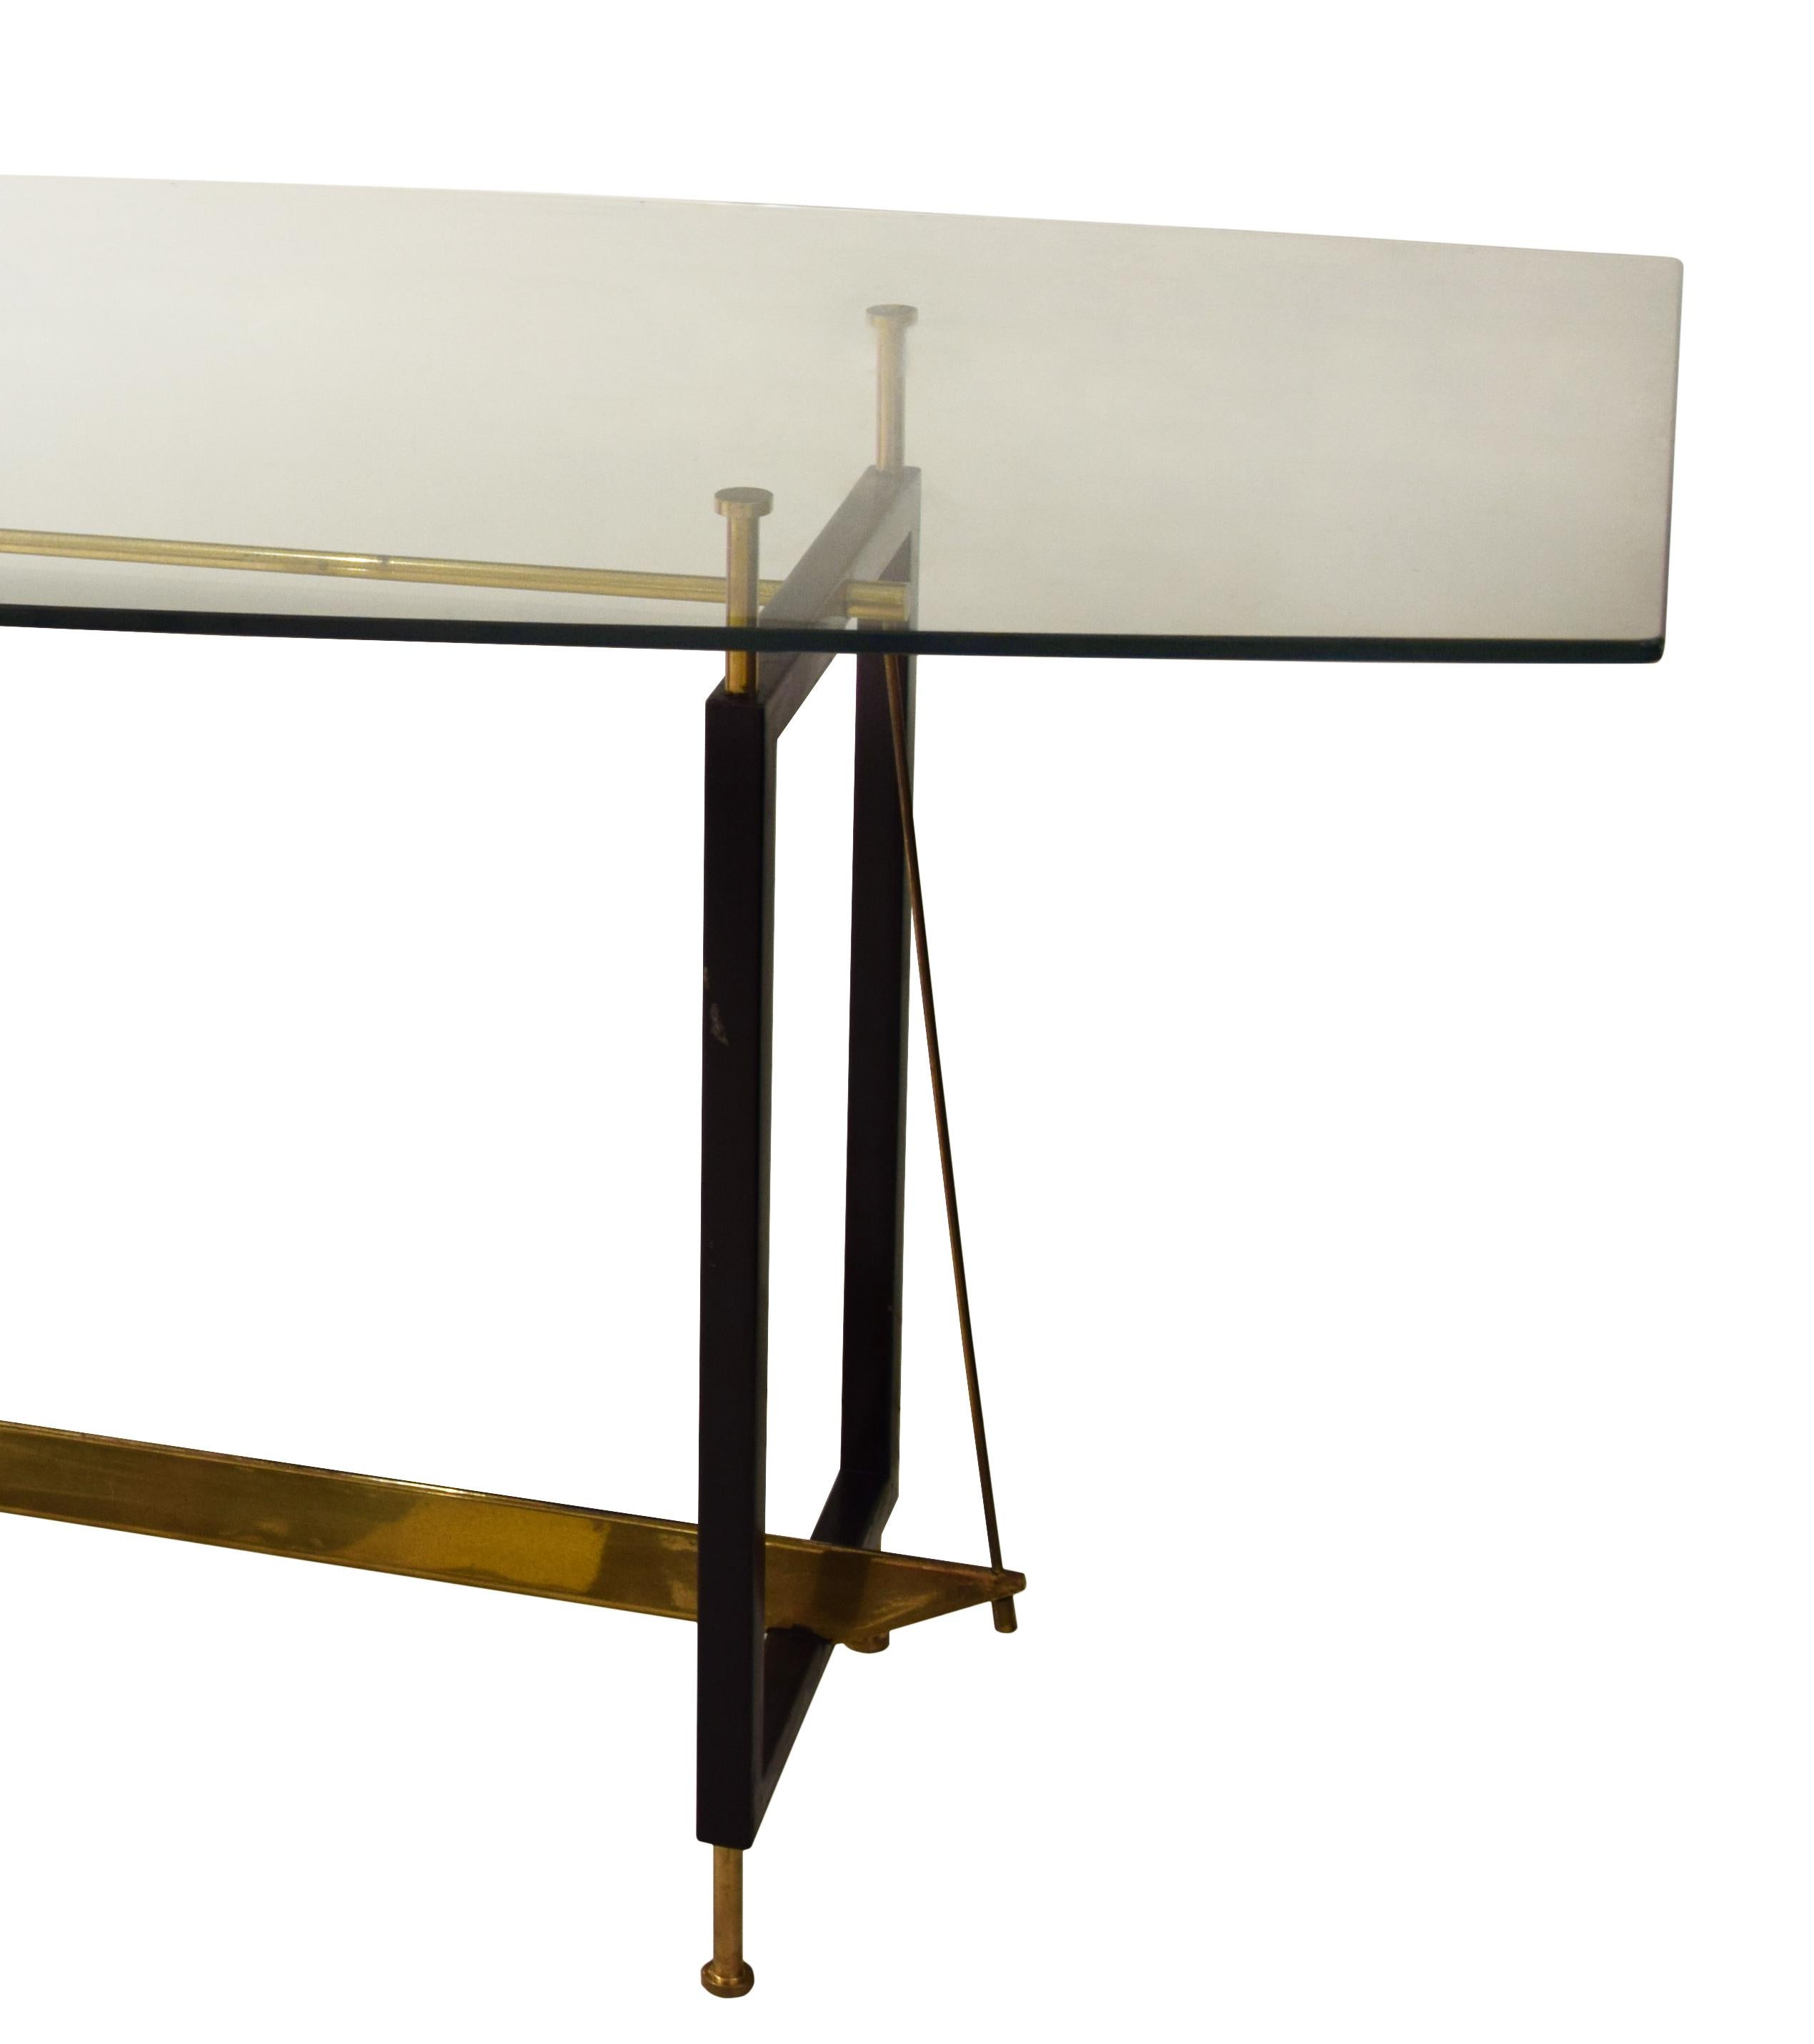 Lacquered metal and brass with glass top.
Very good conditions.

This object is shipped from Italy. Under existing legislation, any object in Italy created over 70 years ago by an artist who has died requires a licence for export regardless of